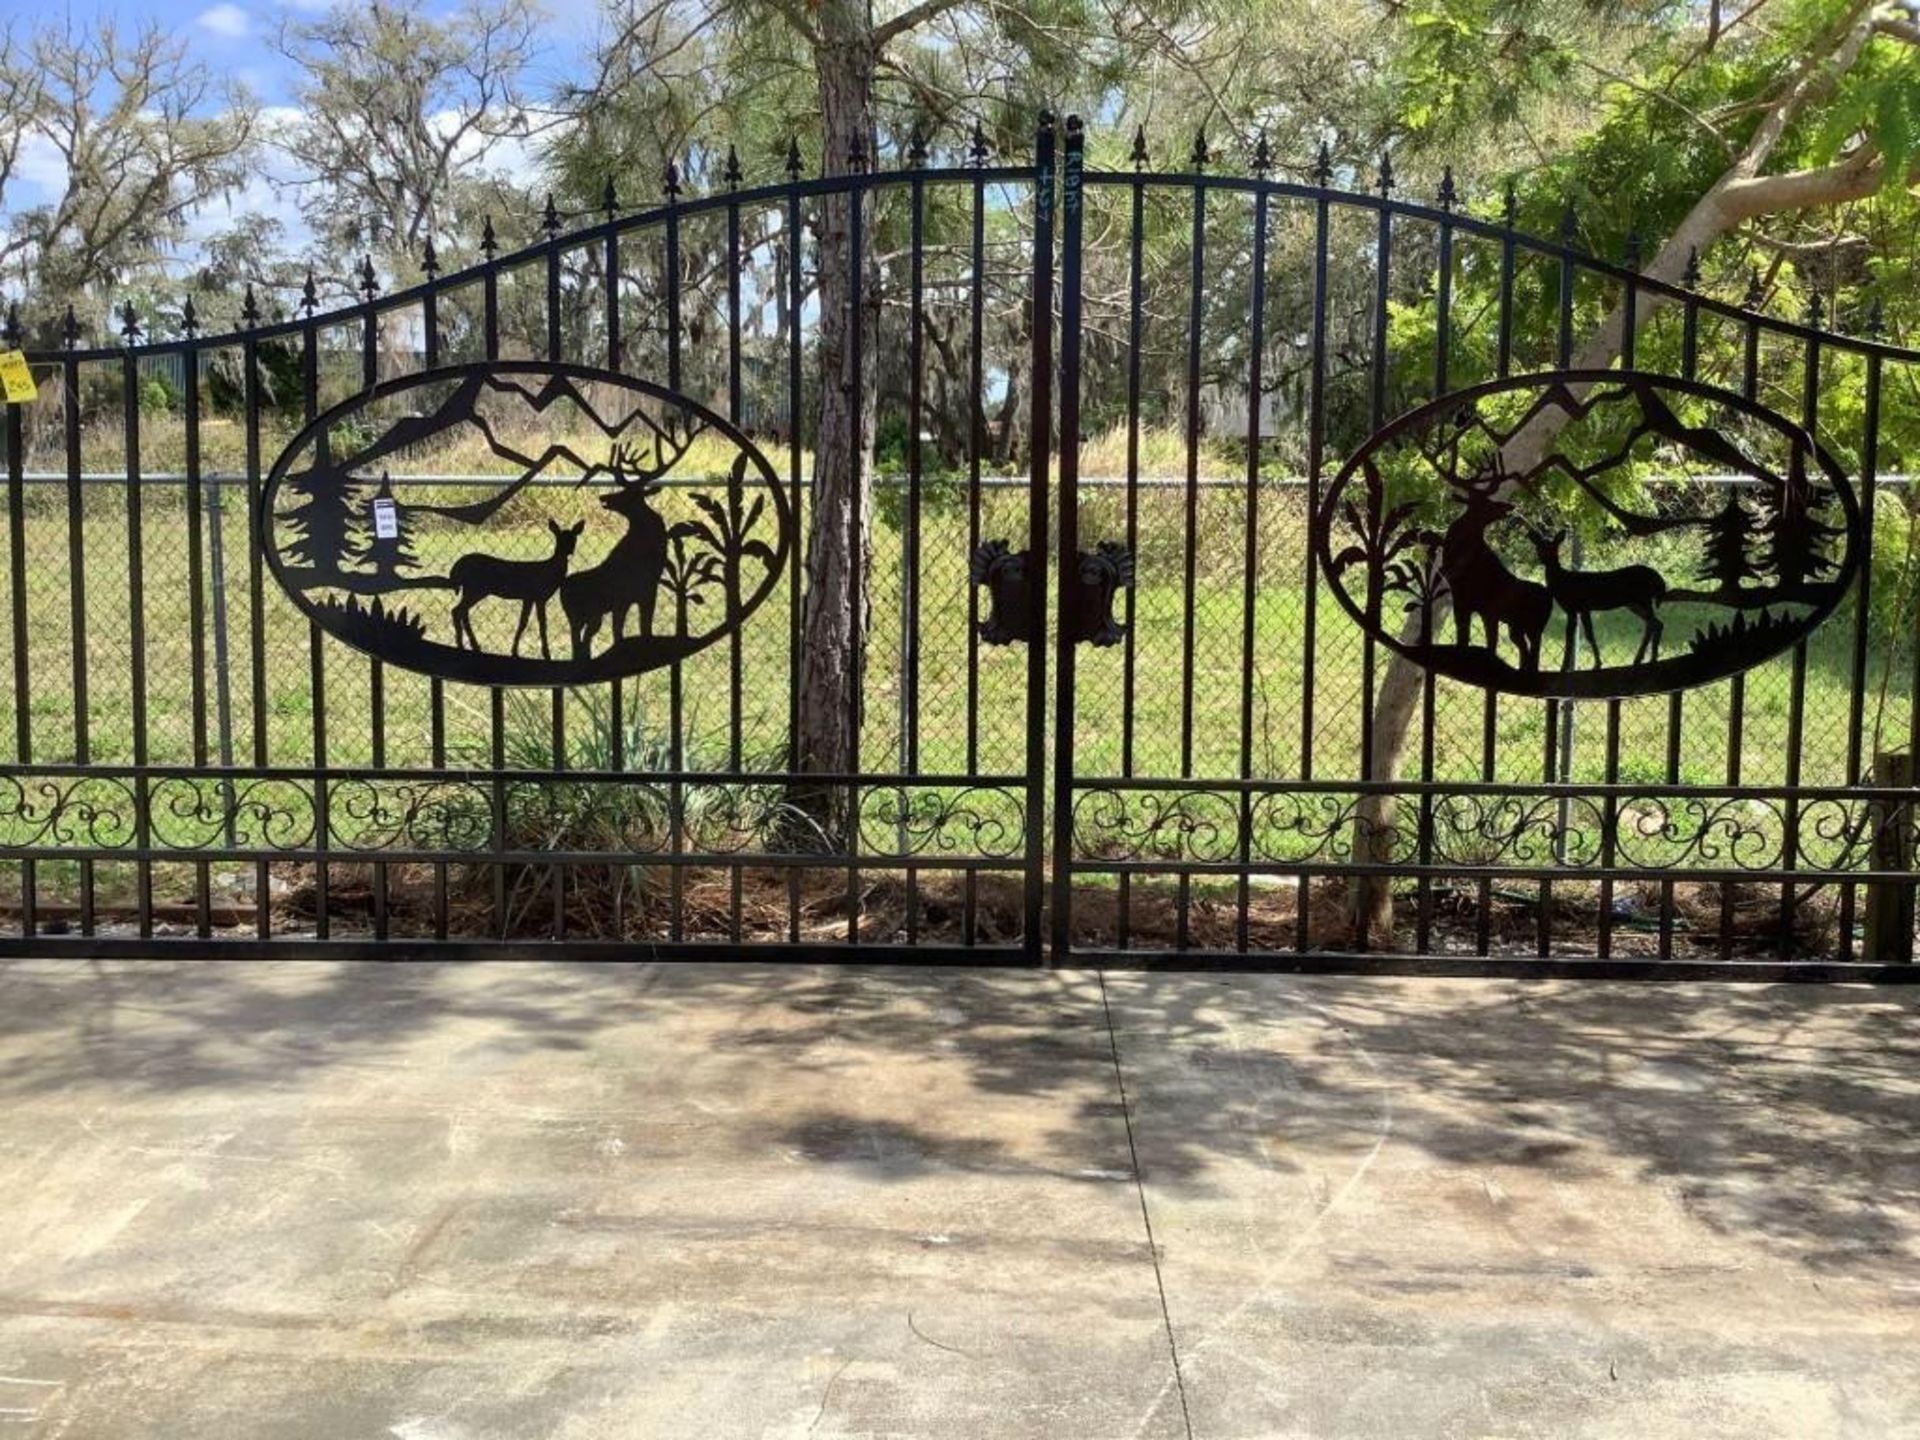 SET OF UNUSED GREAT BEAR 20FT BI PARTING WROUGHT IRON GATES, 10FT EACH PIECE (20' TOTAL WIDTH). 2 PI